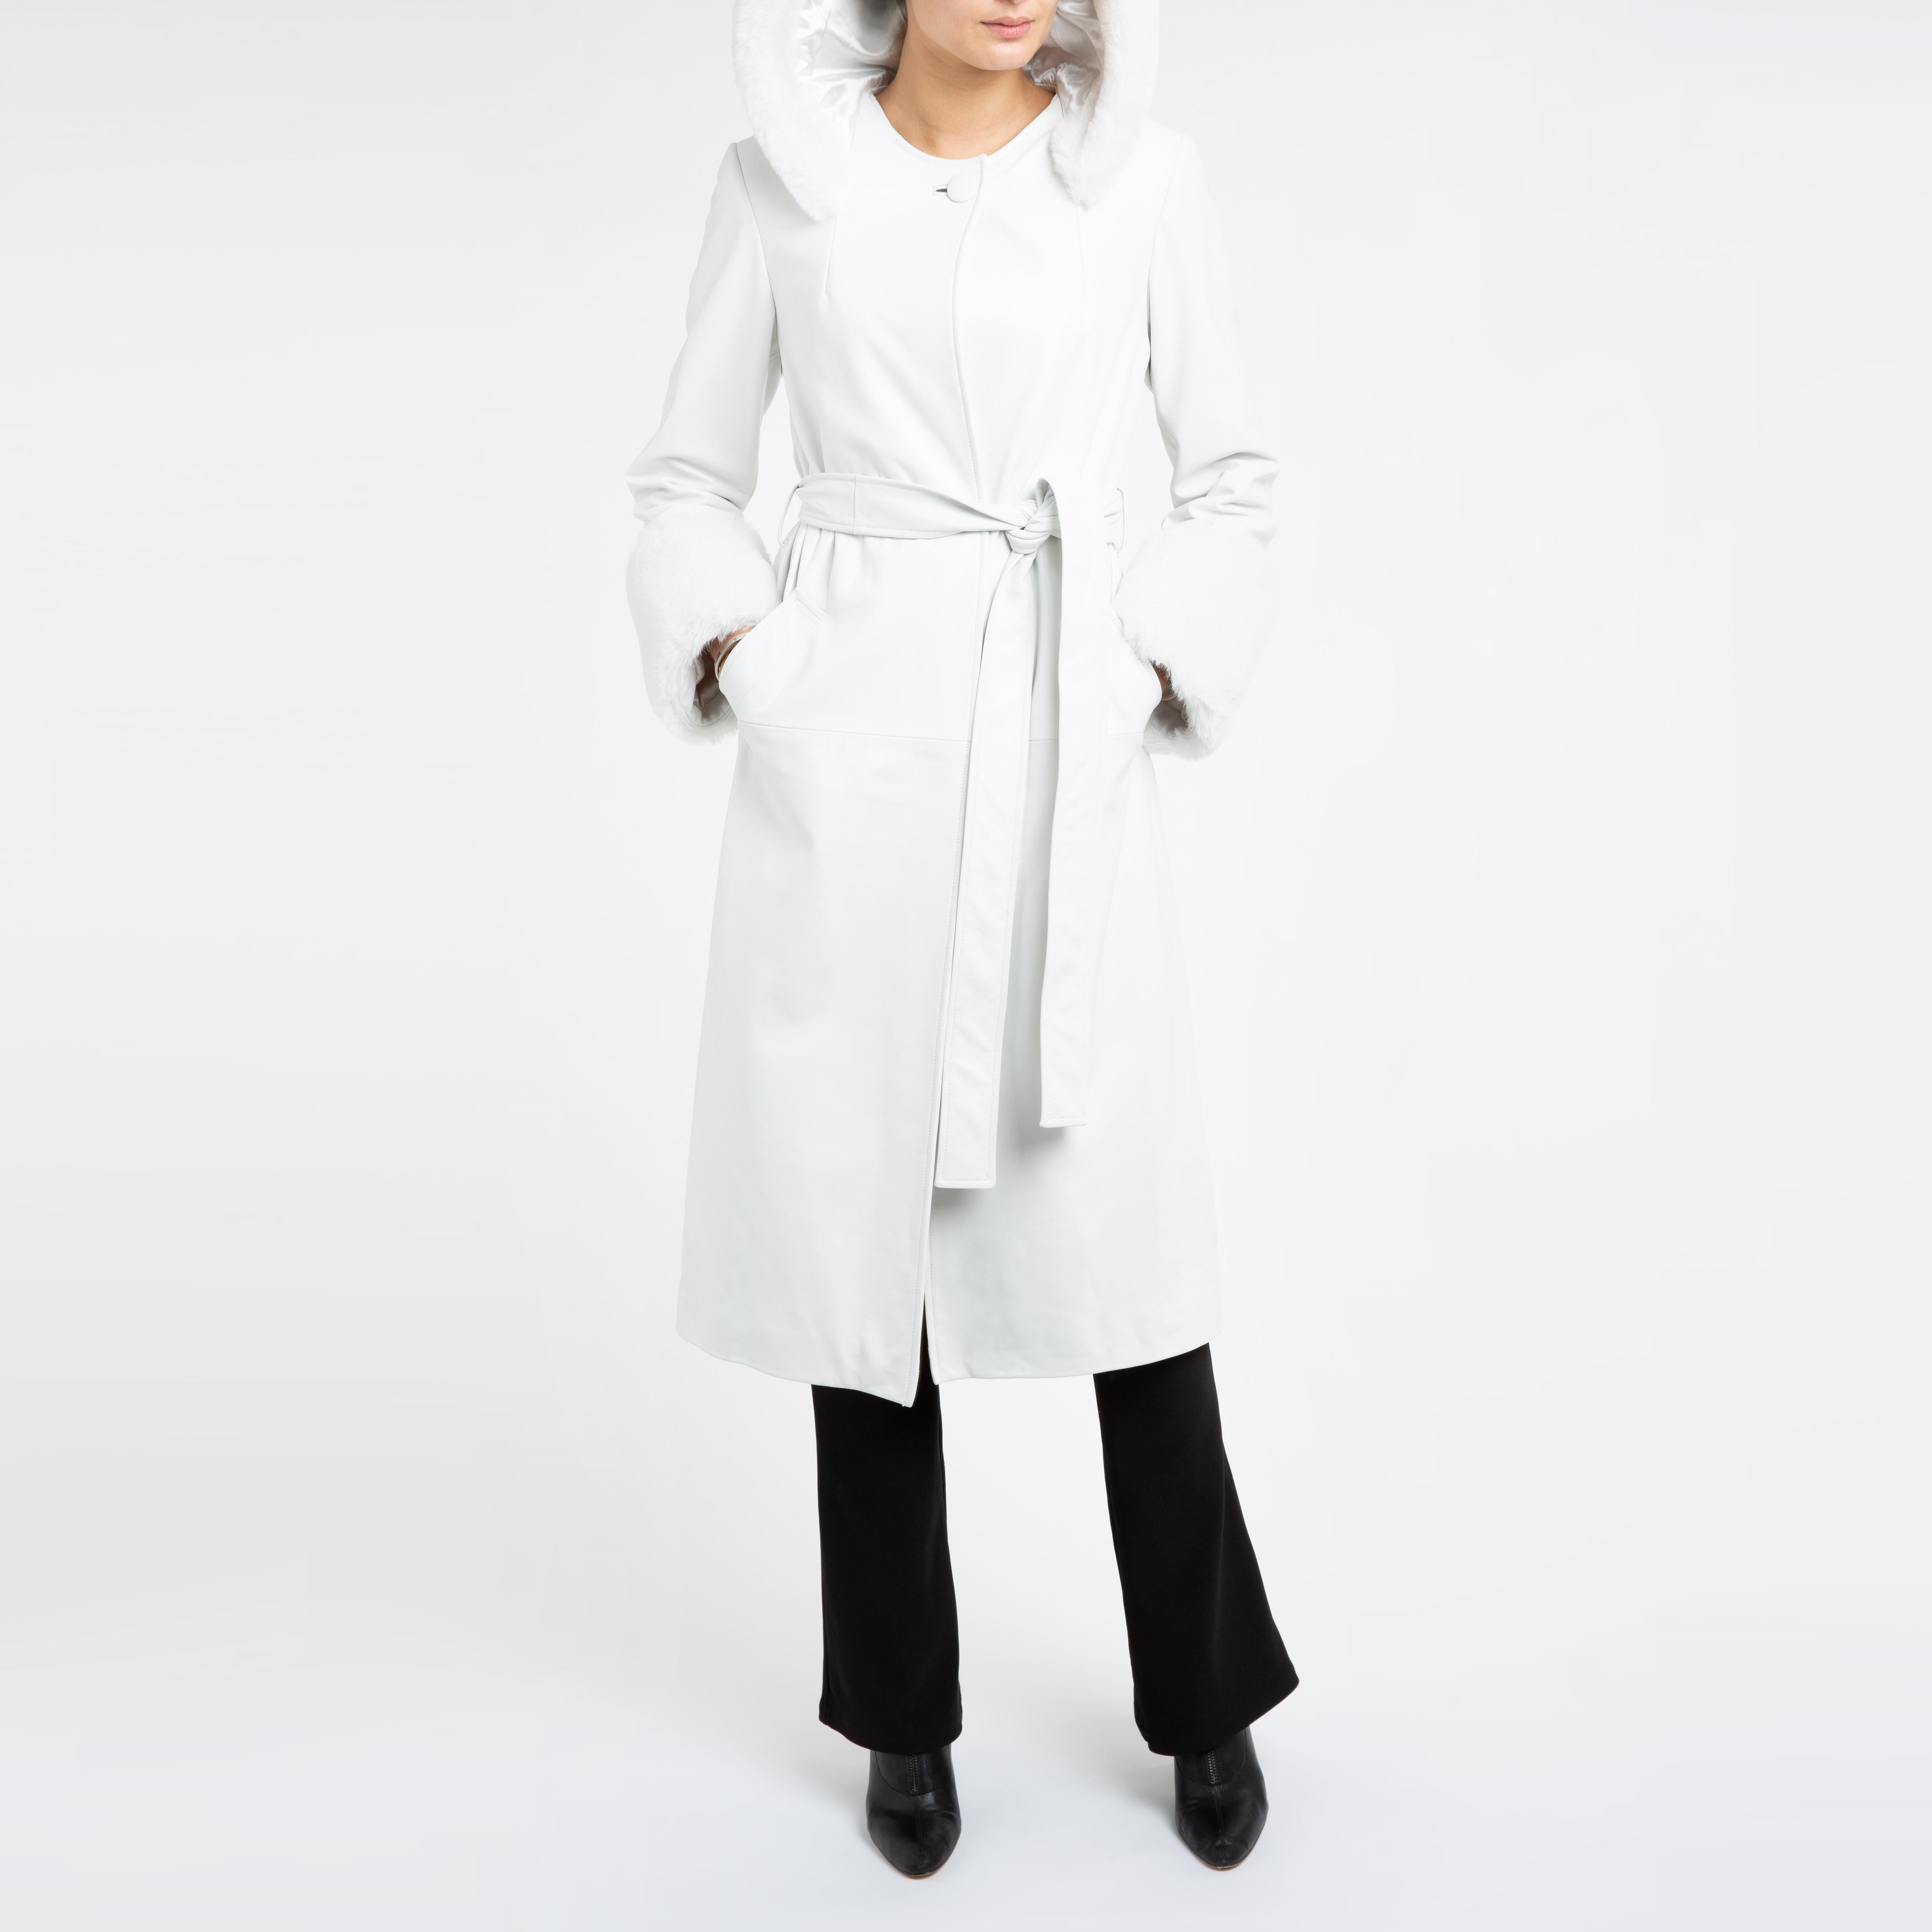 Verheyen Aurora Hooded Leather Trench Coat in White with Faux Fur - Size uk 10 For Sale 8